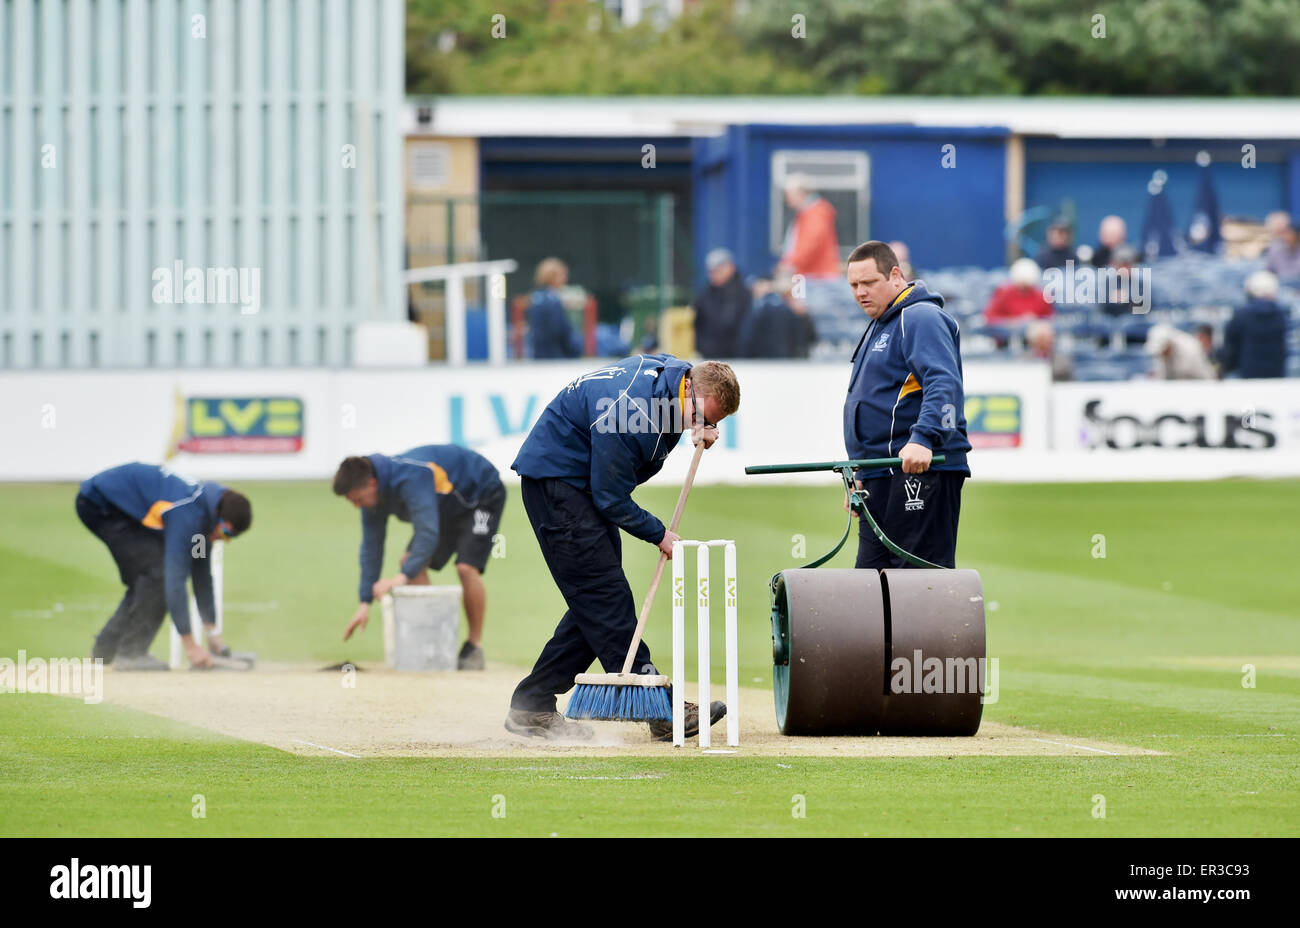 Brighton UK 24th May 2015 - Ground staff at Sussex Cricket Club preparing the wicket and pitch for play during the game between Sussex and Warwickshire  The pitch has come under suspicion by the ECB after the large number of wickets that were taken on the first day Stock Photo